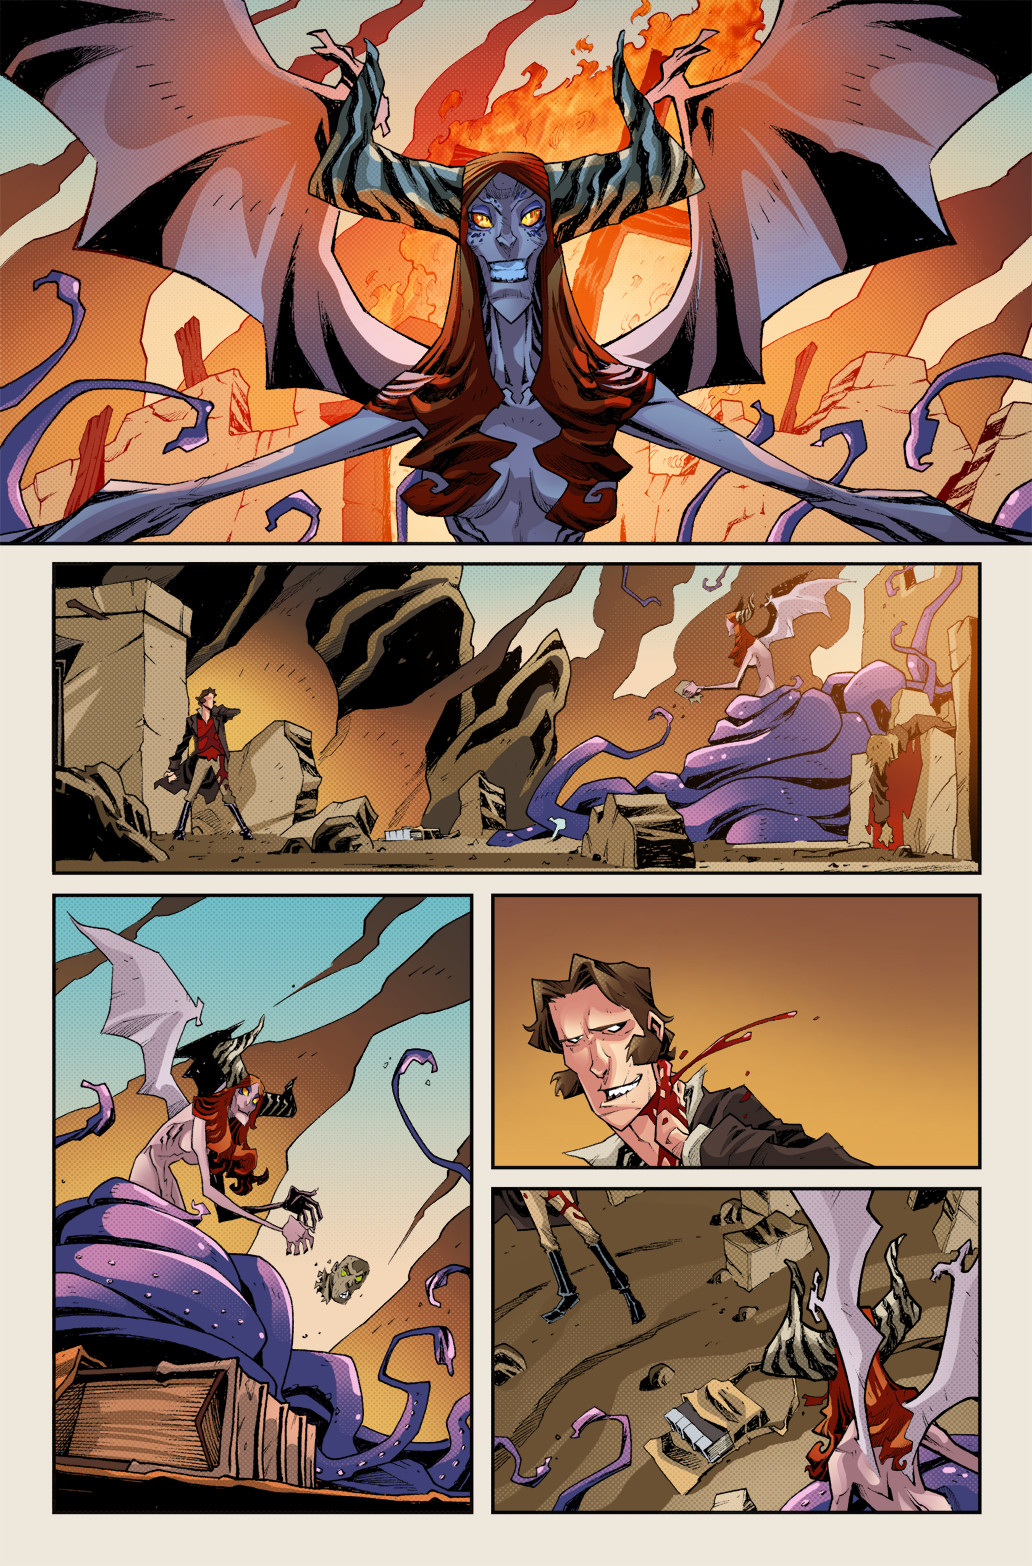 GONERS - #6, page 2